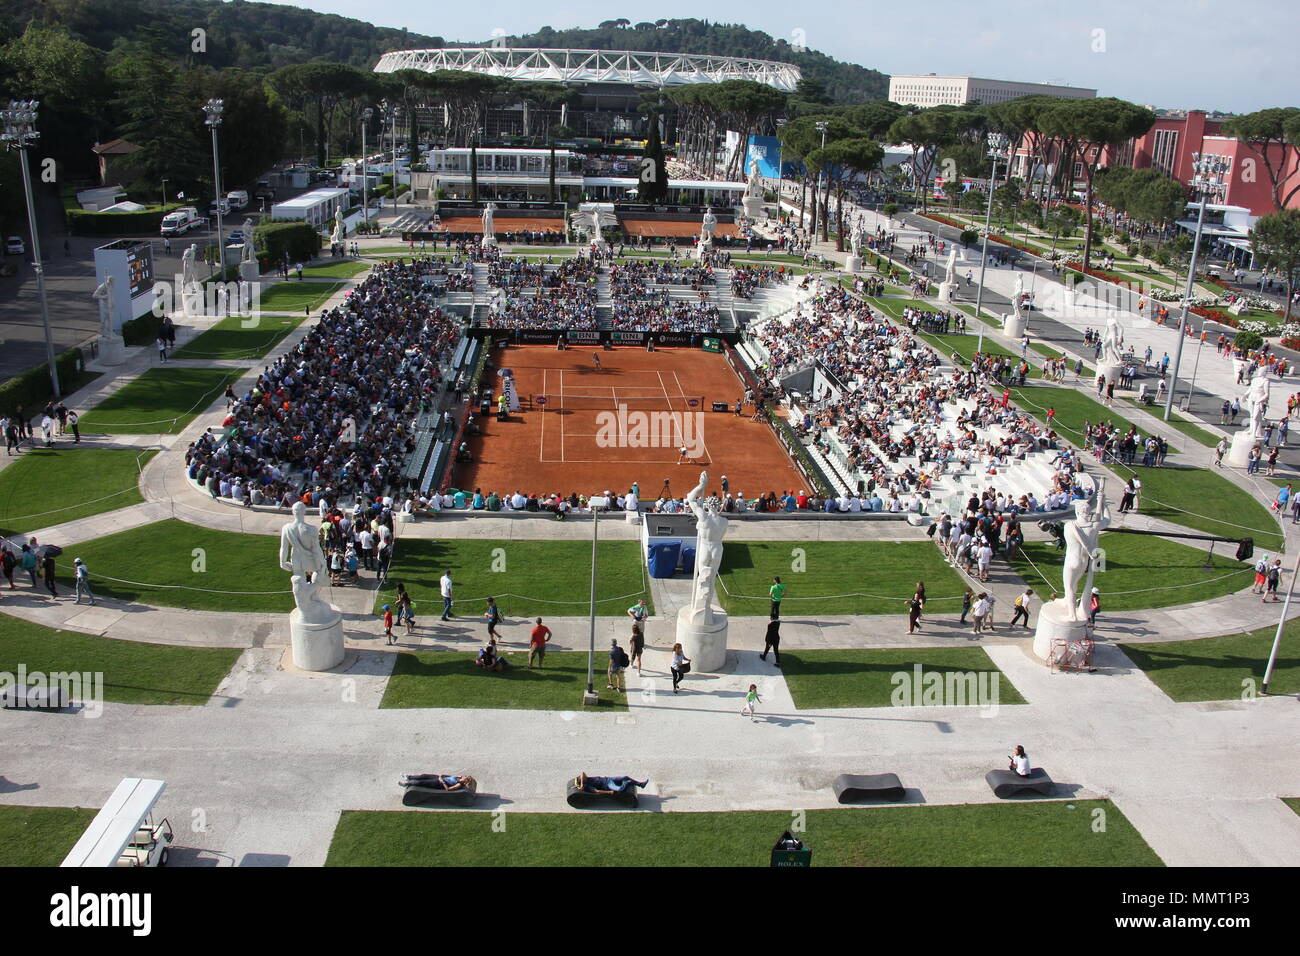 Rome, Italy. 12th May, 2018. Scenes at the ATP World Tour Masters 1000 Rome  tennis tournament at the Foro Italico in Rome Credit: Gari Wyn  Williams/Alamy Live News Stock Photo - Alamy